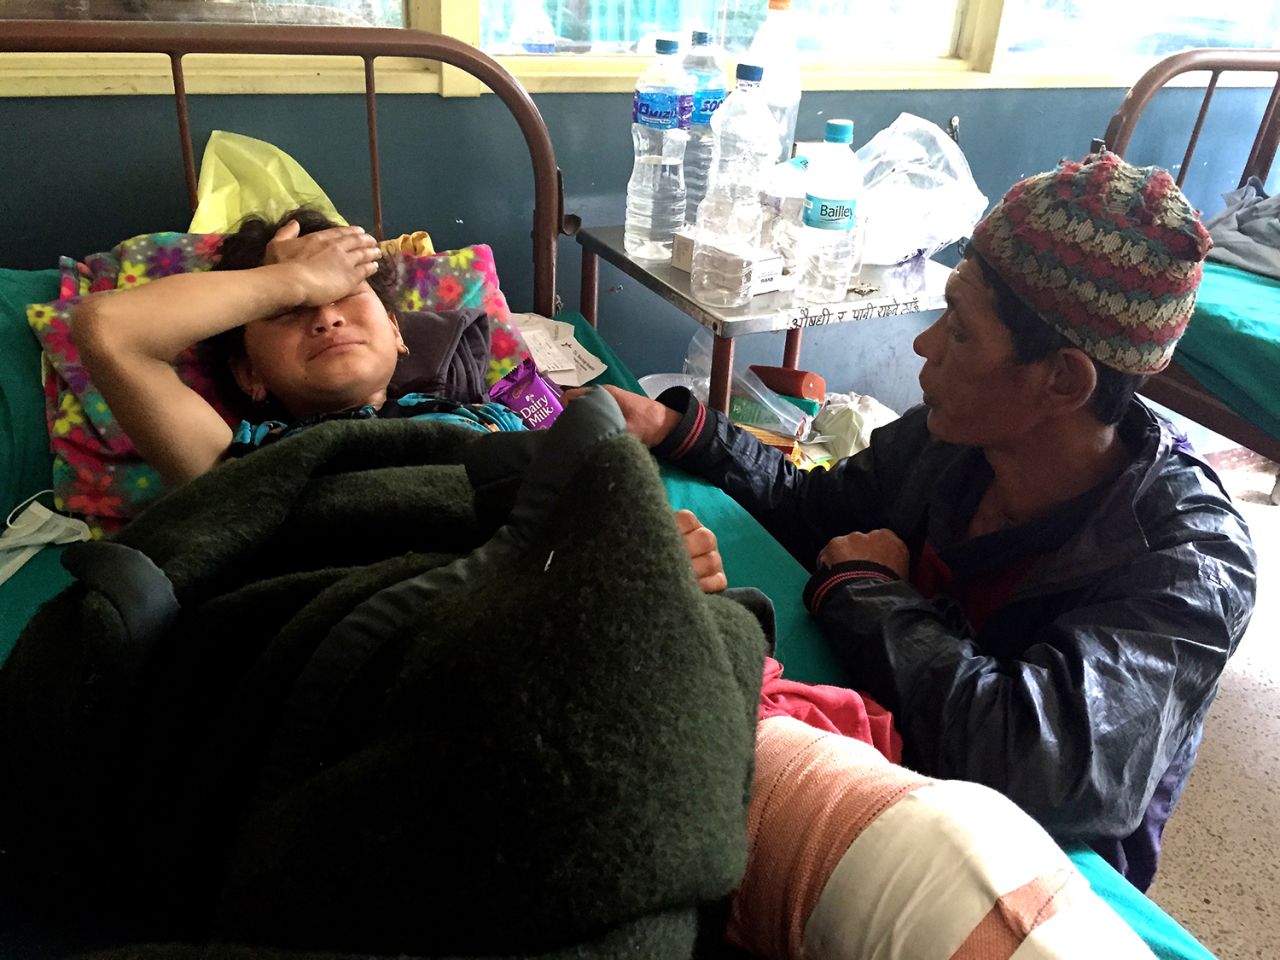 Uncle Sharing Bed With Daughter - In Nepal: A 10-year-old's scary future after earthquake | CNN